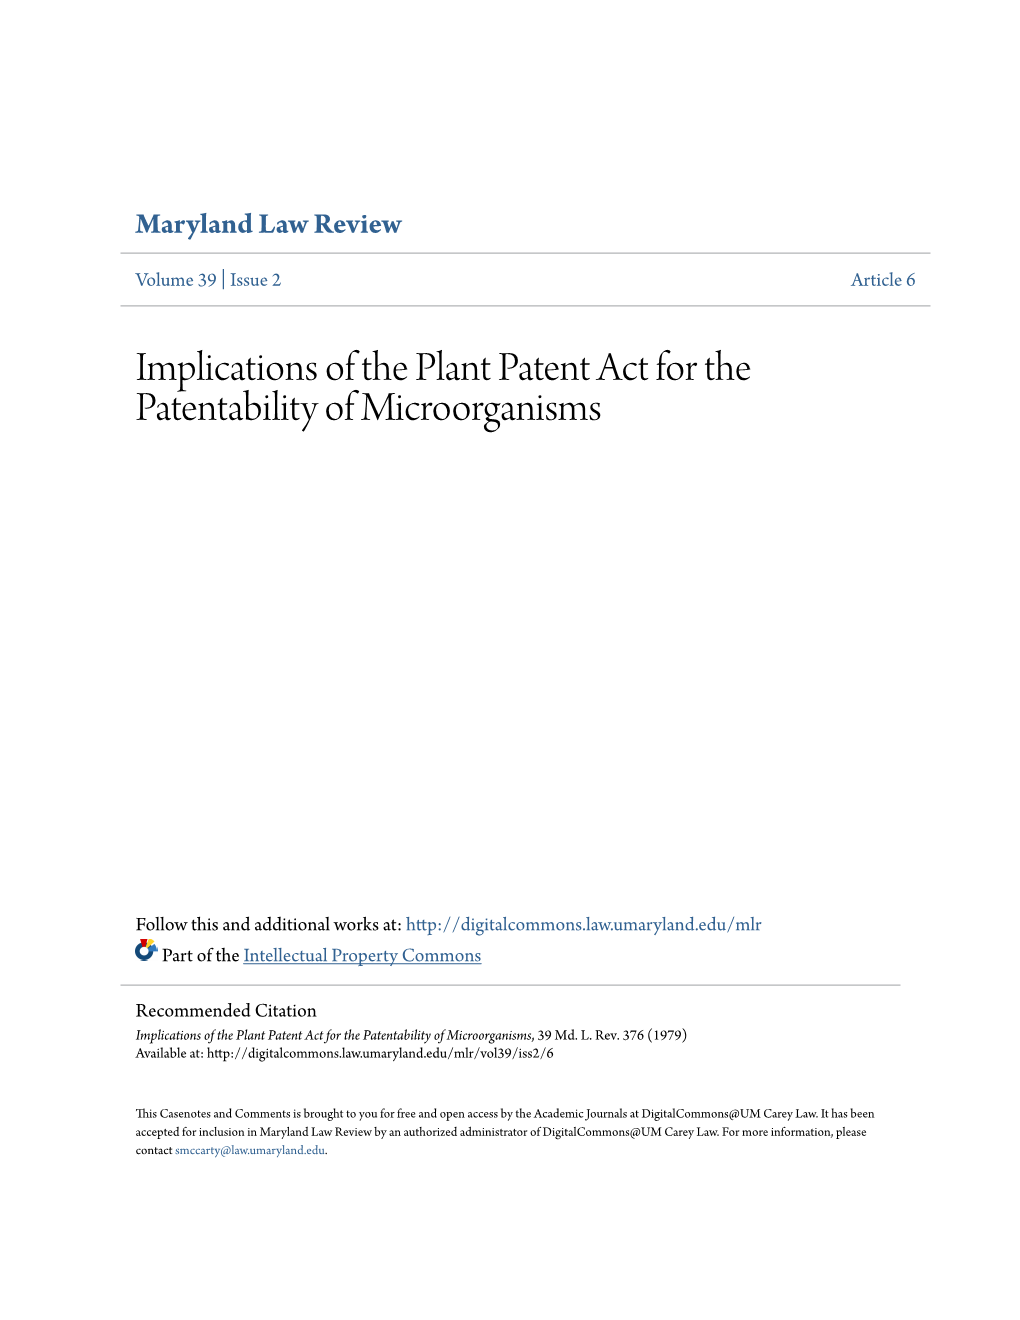 Implications of the Plant Patent Act for the Patentability of Microorganisms